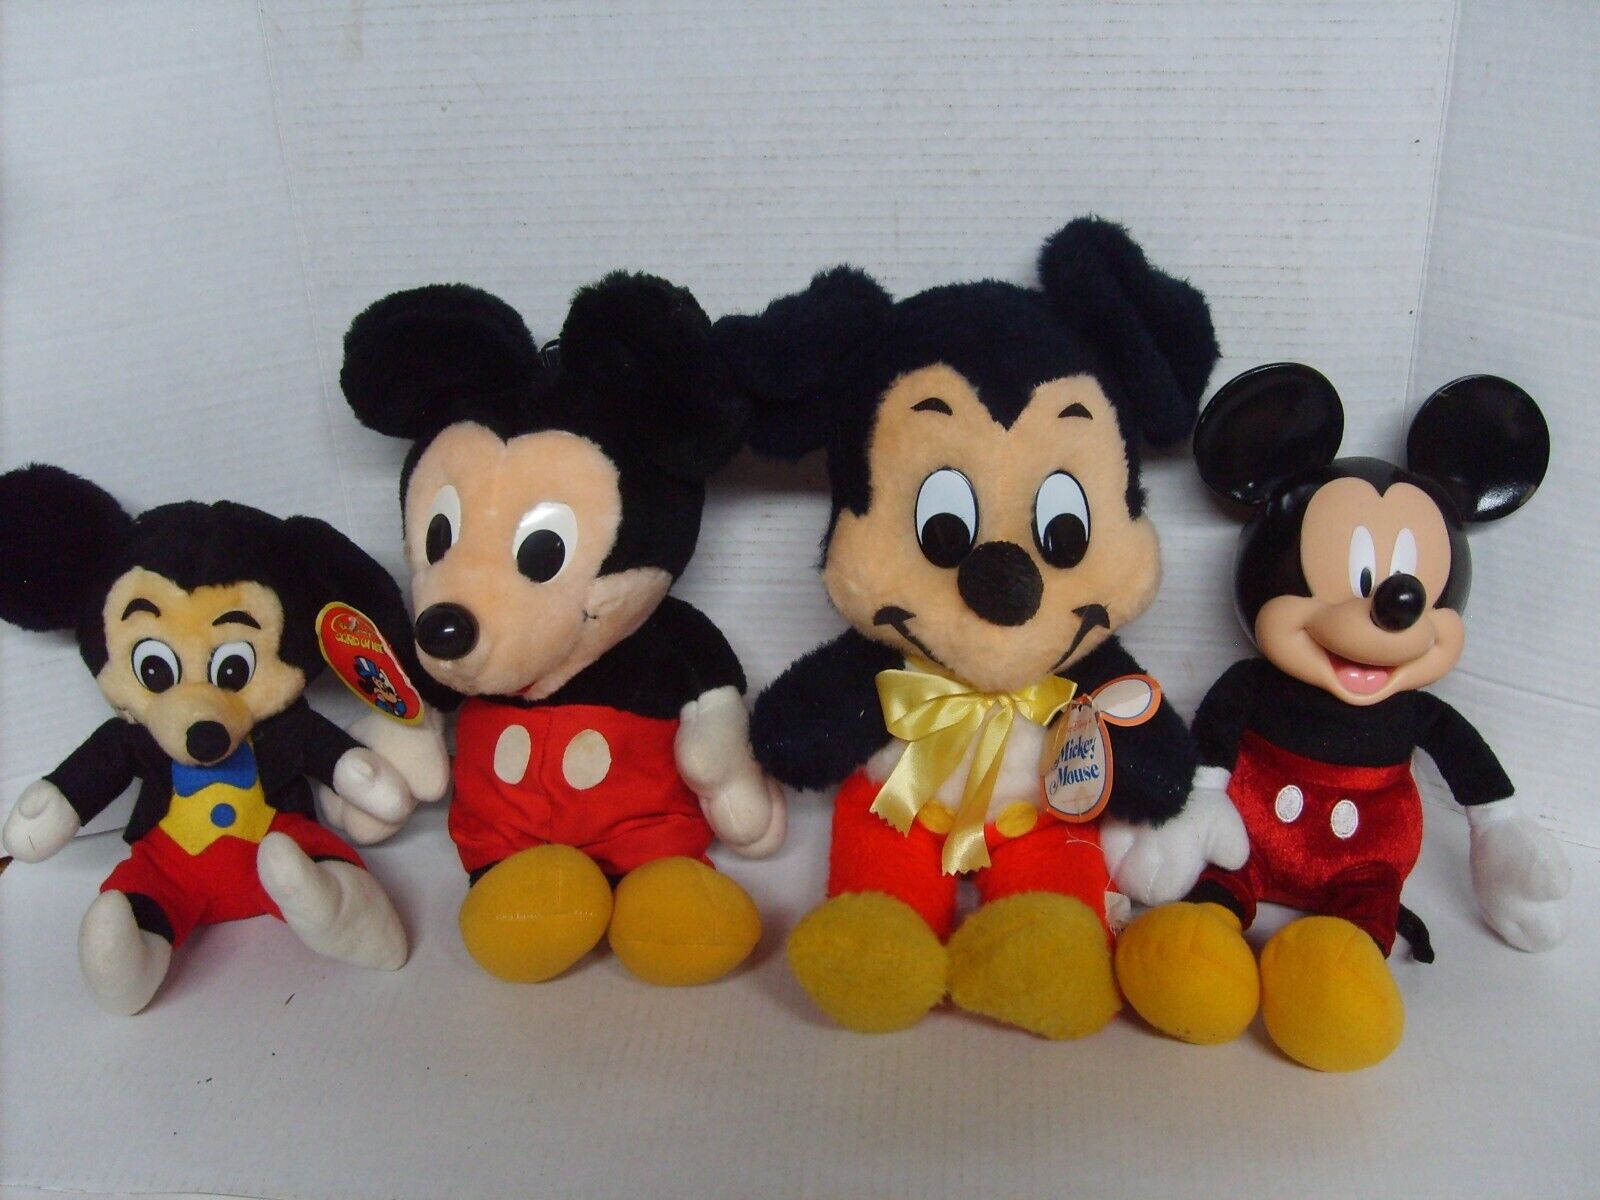 4 VINTAGE DISNEY OLDER PLUSH MICKEY MOUSE FIGURES 2 WITH TAGS WDW